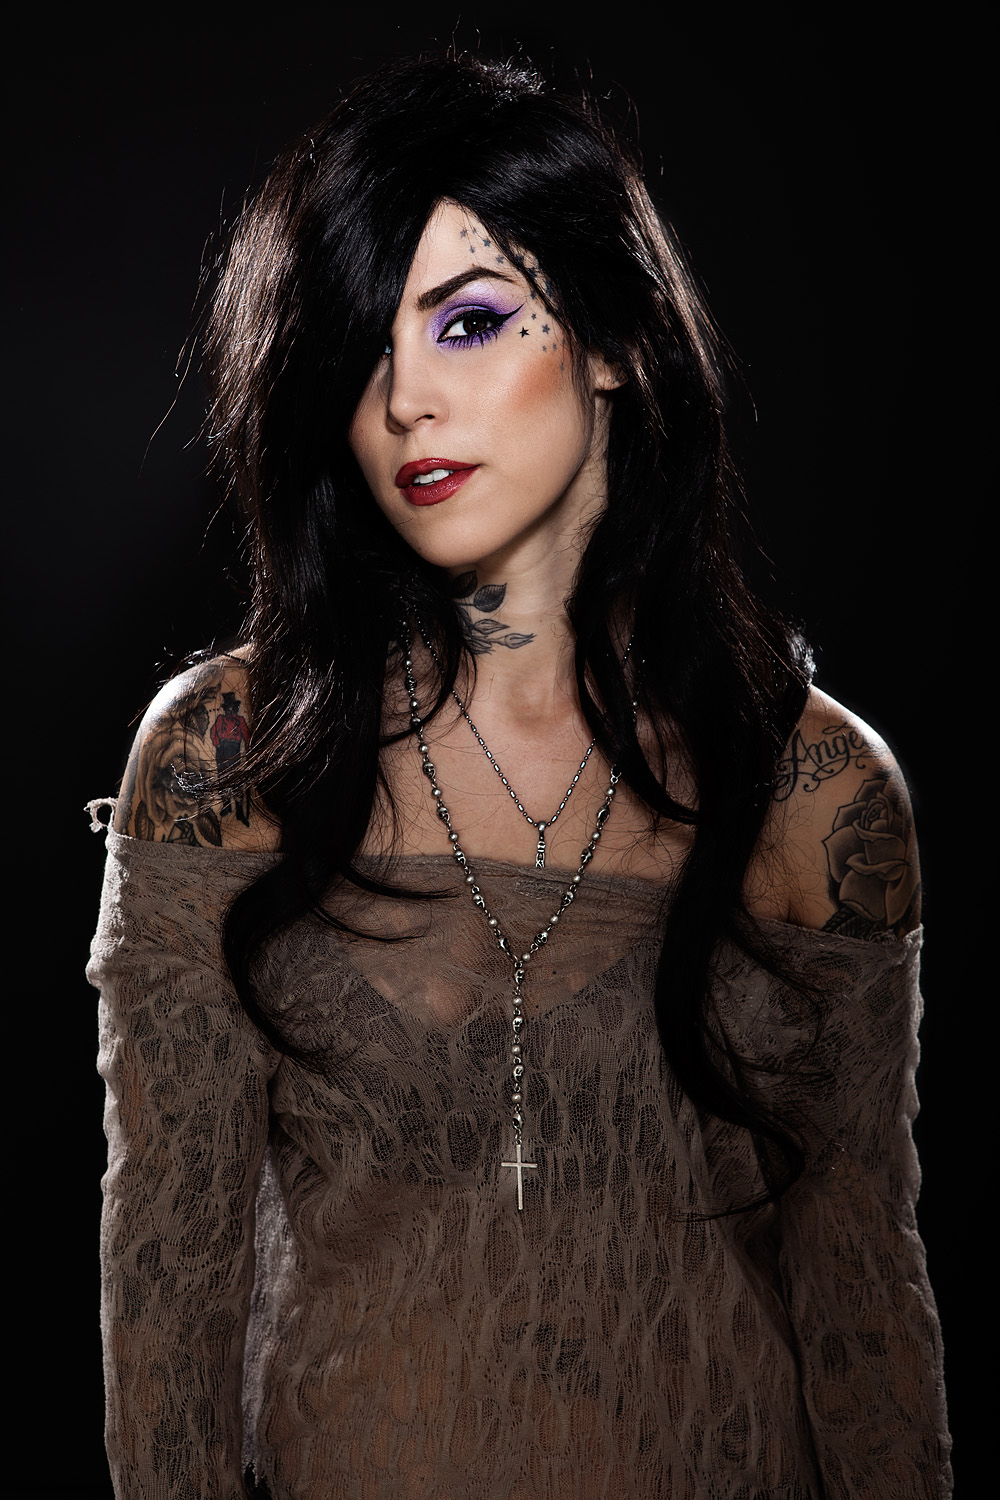 Download Kat von d without tattoos Wallpaper HD FREE Uploaded by